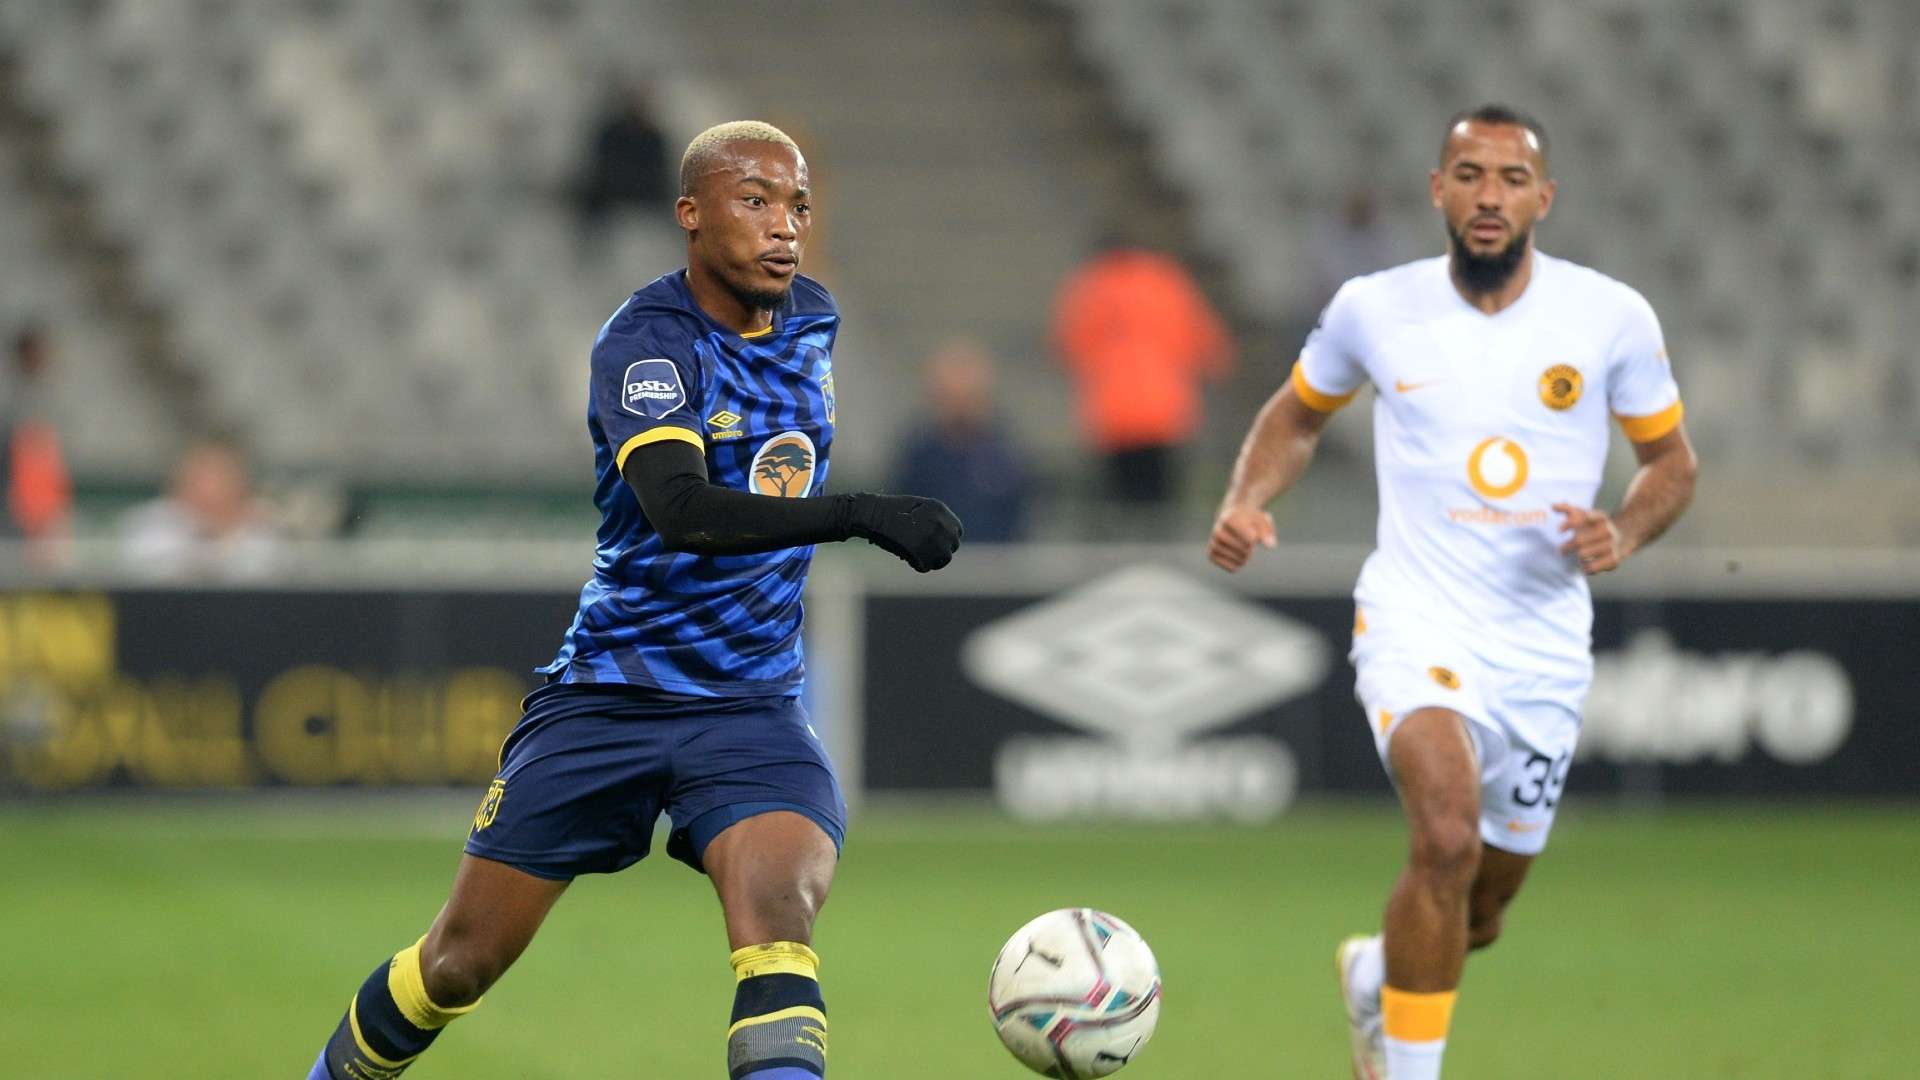 Khanyisa Mayo, Cape Town City & Reeve Frosler, Kaizer Chiefs, August 2022